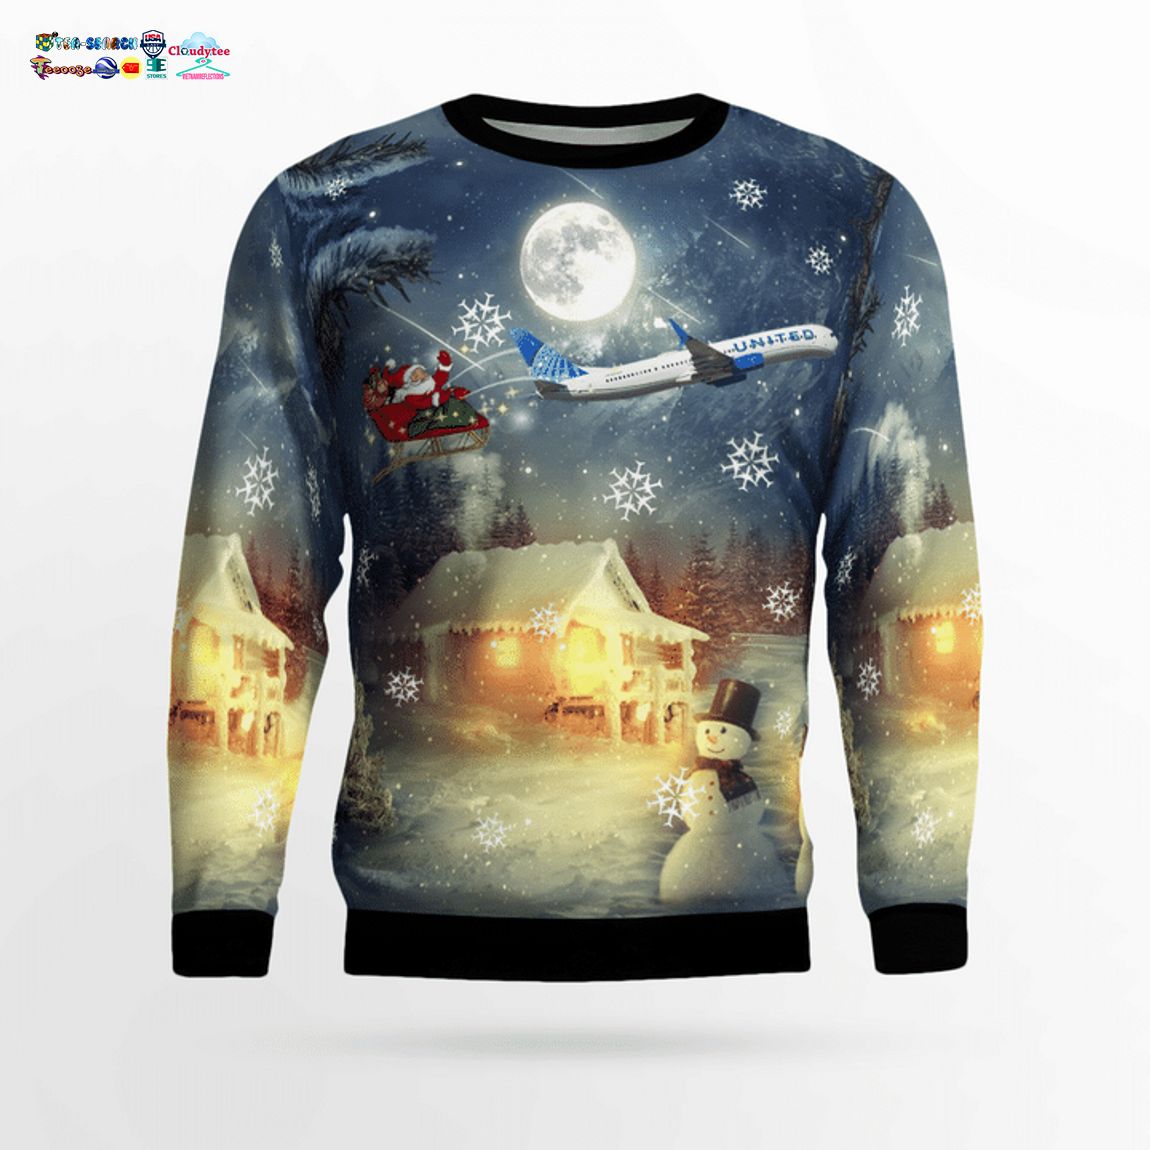 United Airlines Boeing 737-924ER 3D Christmas Sweater - Saleoff